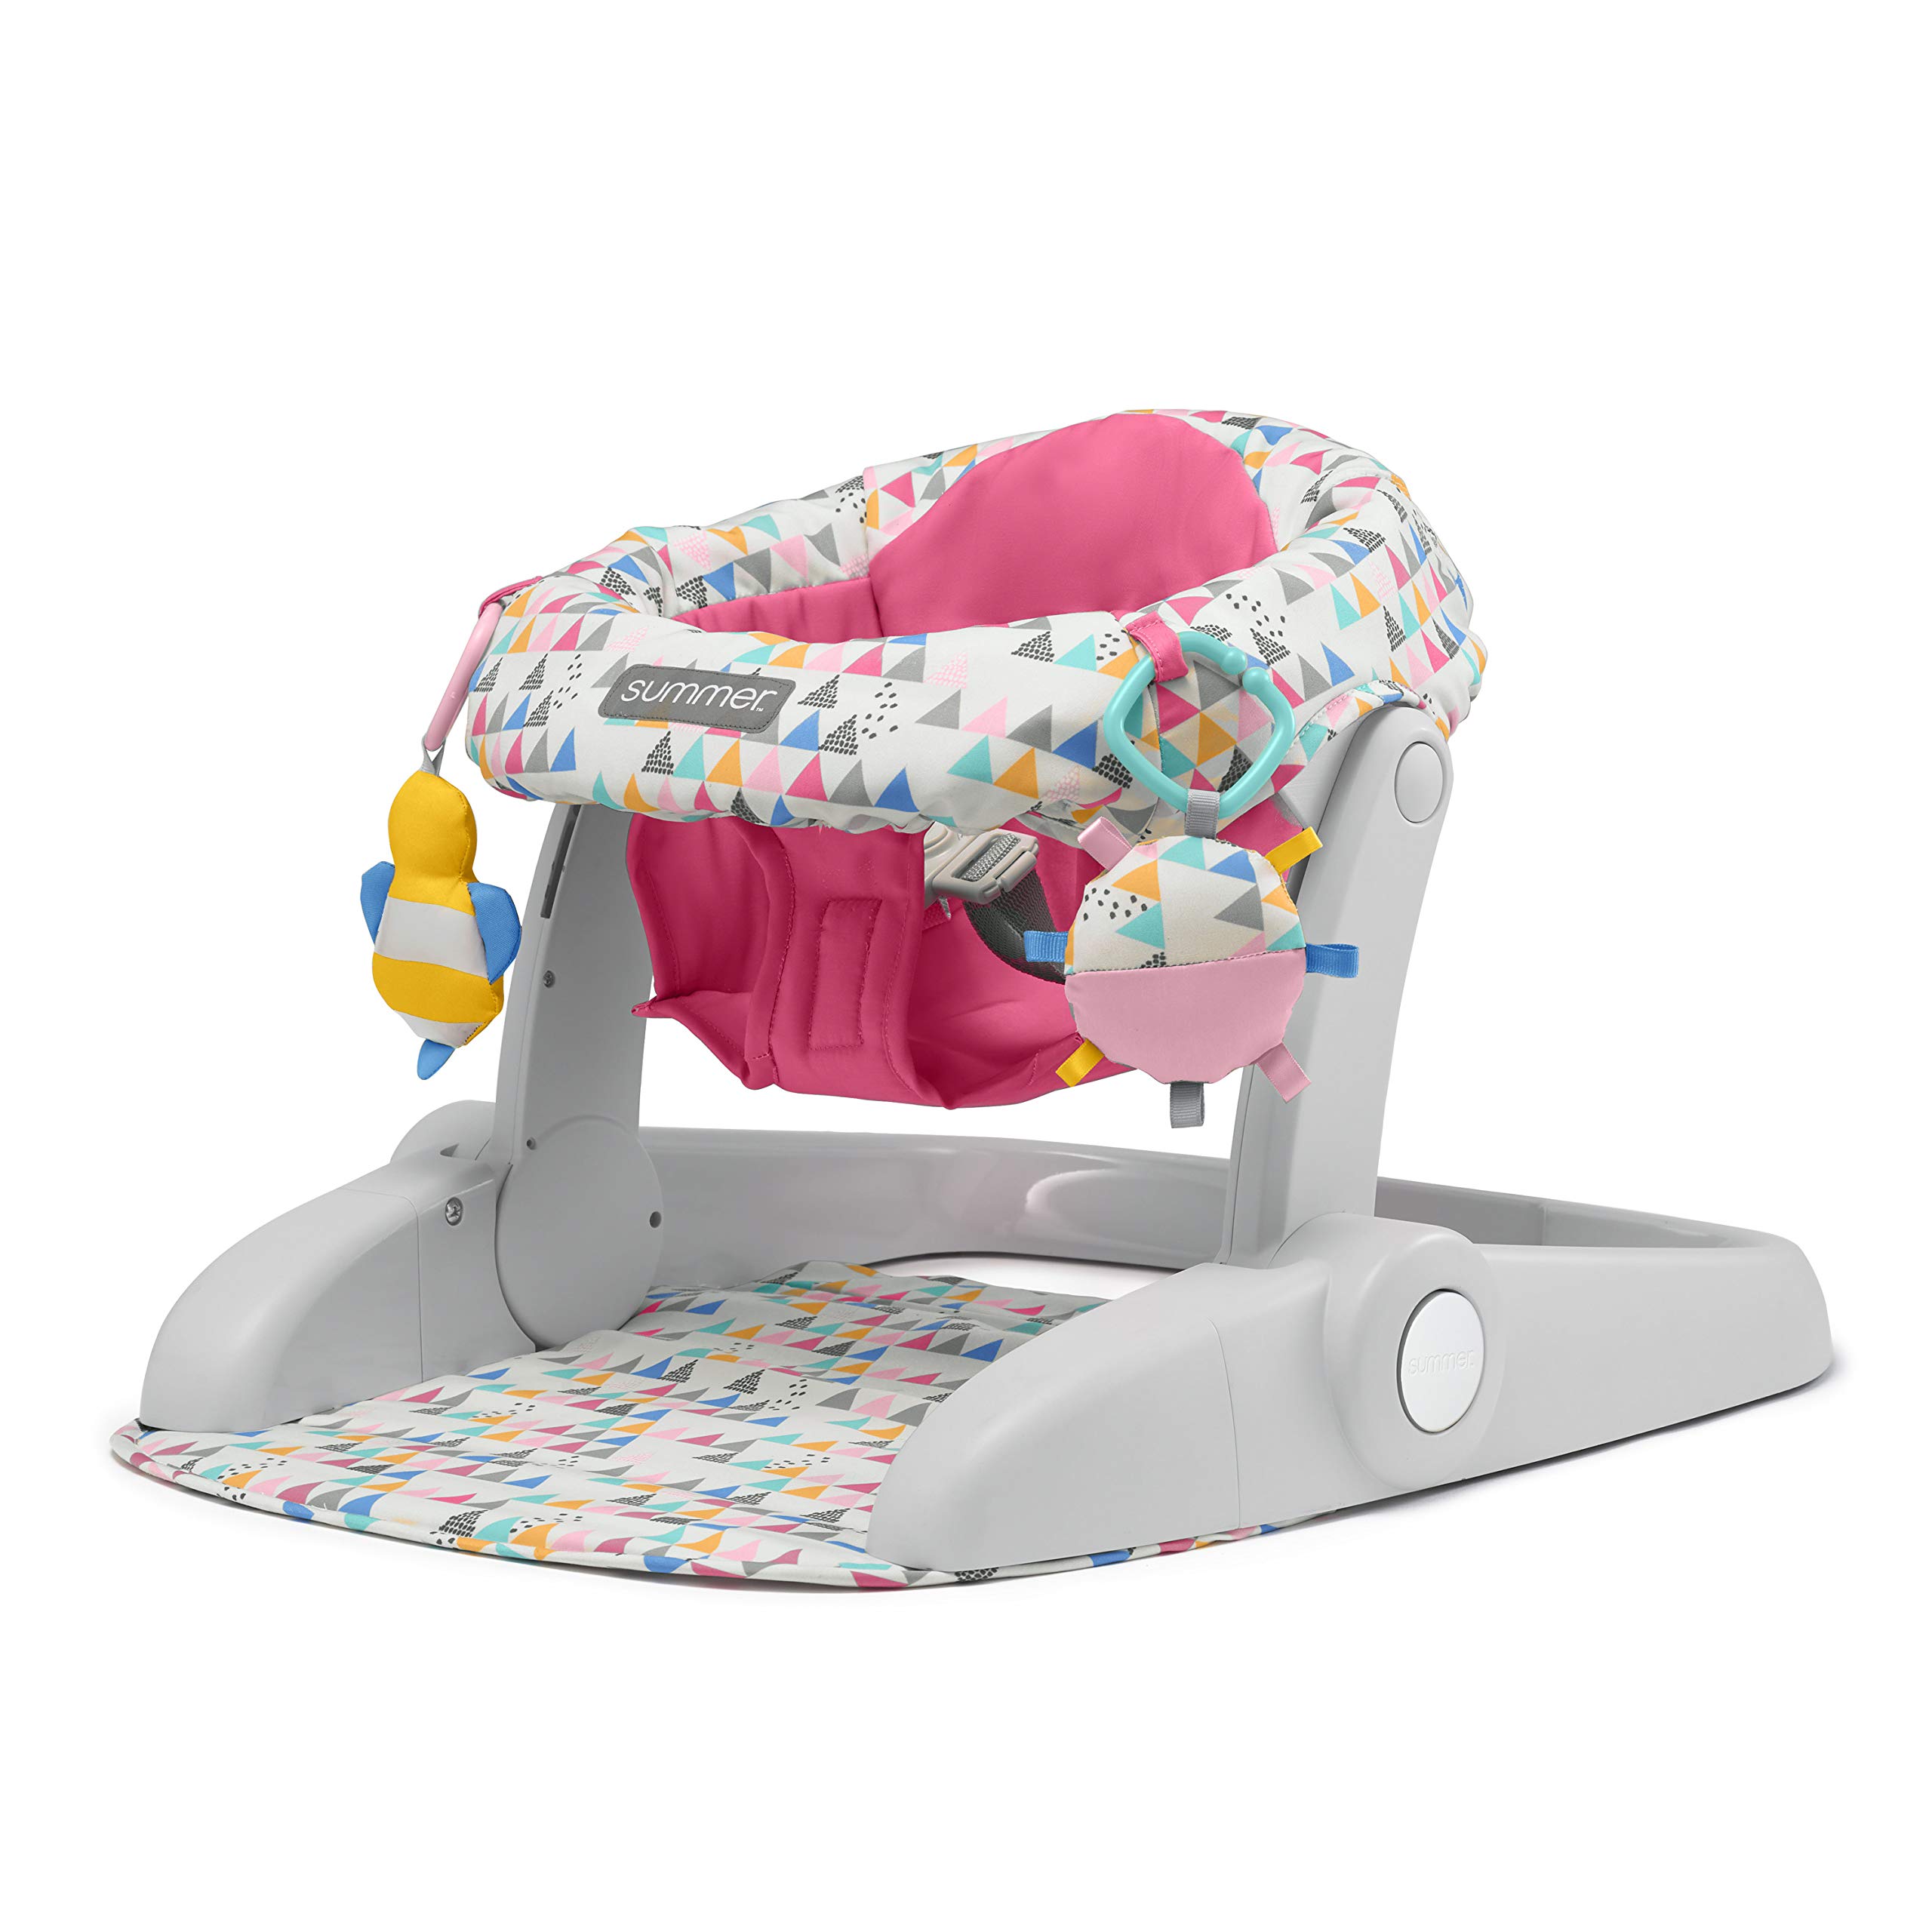 Summer® Learn-to-Sit™ 2-Position Floor Seat (Funfetti Pink) – Sit Baby Up in This Adjustable Baby Activity Seat Appropriate for Ages 4-12 Months – Includes Toys